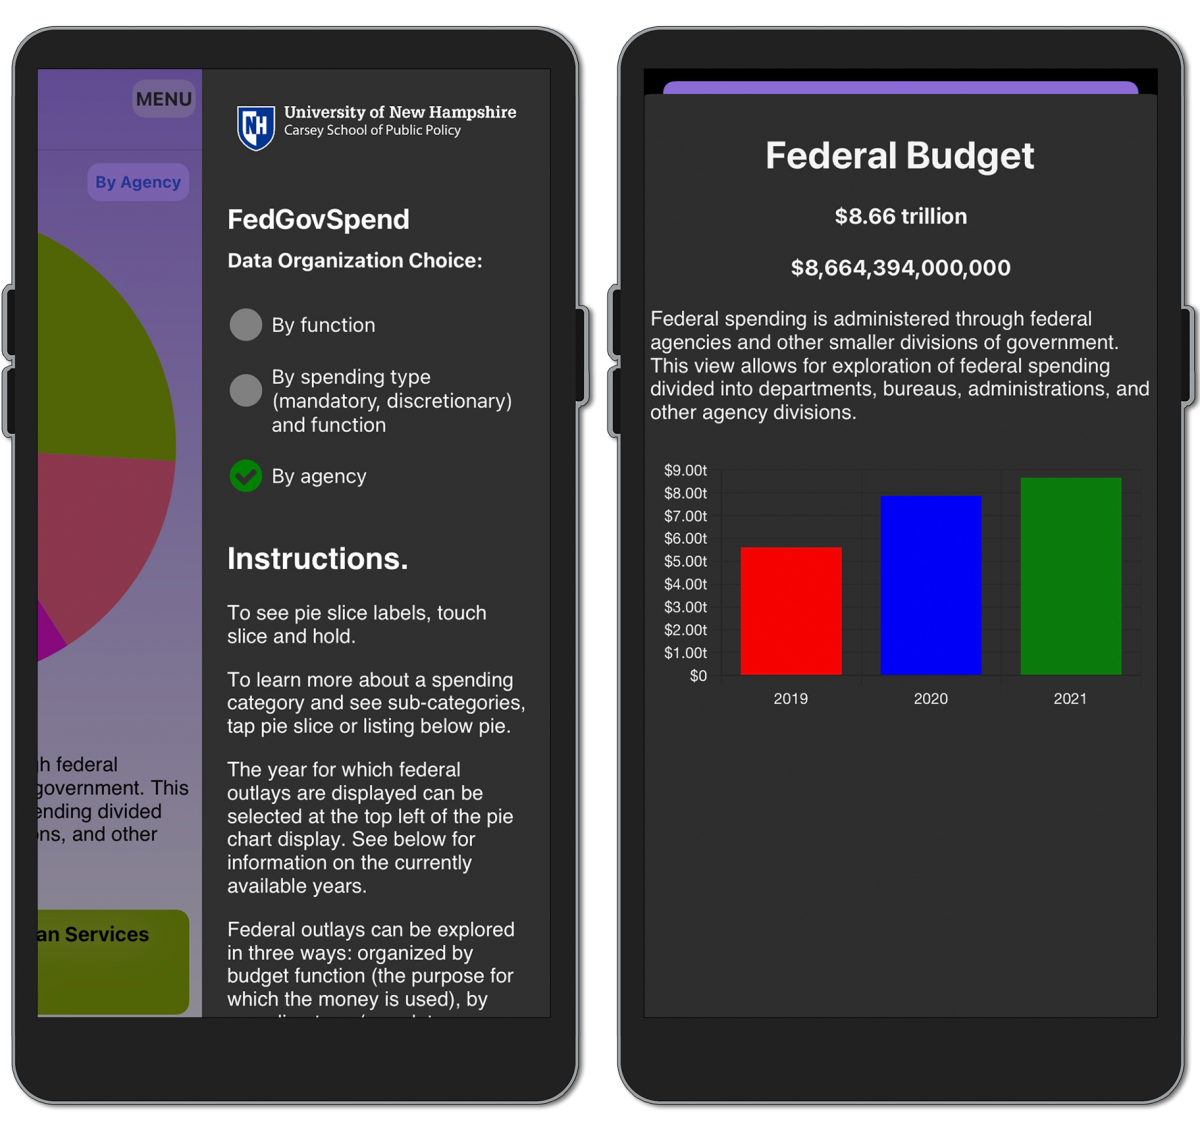 A screenshot showing the Version 2.0 updates to the fedgovspend app